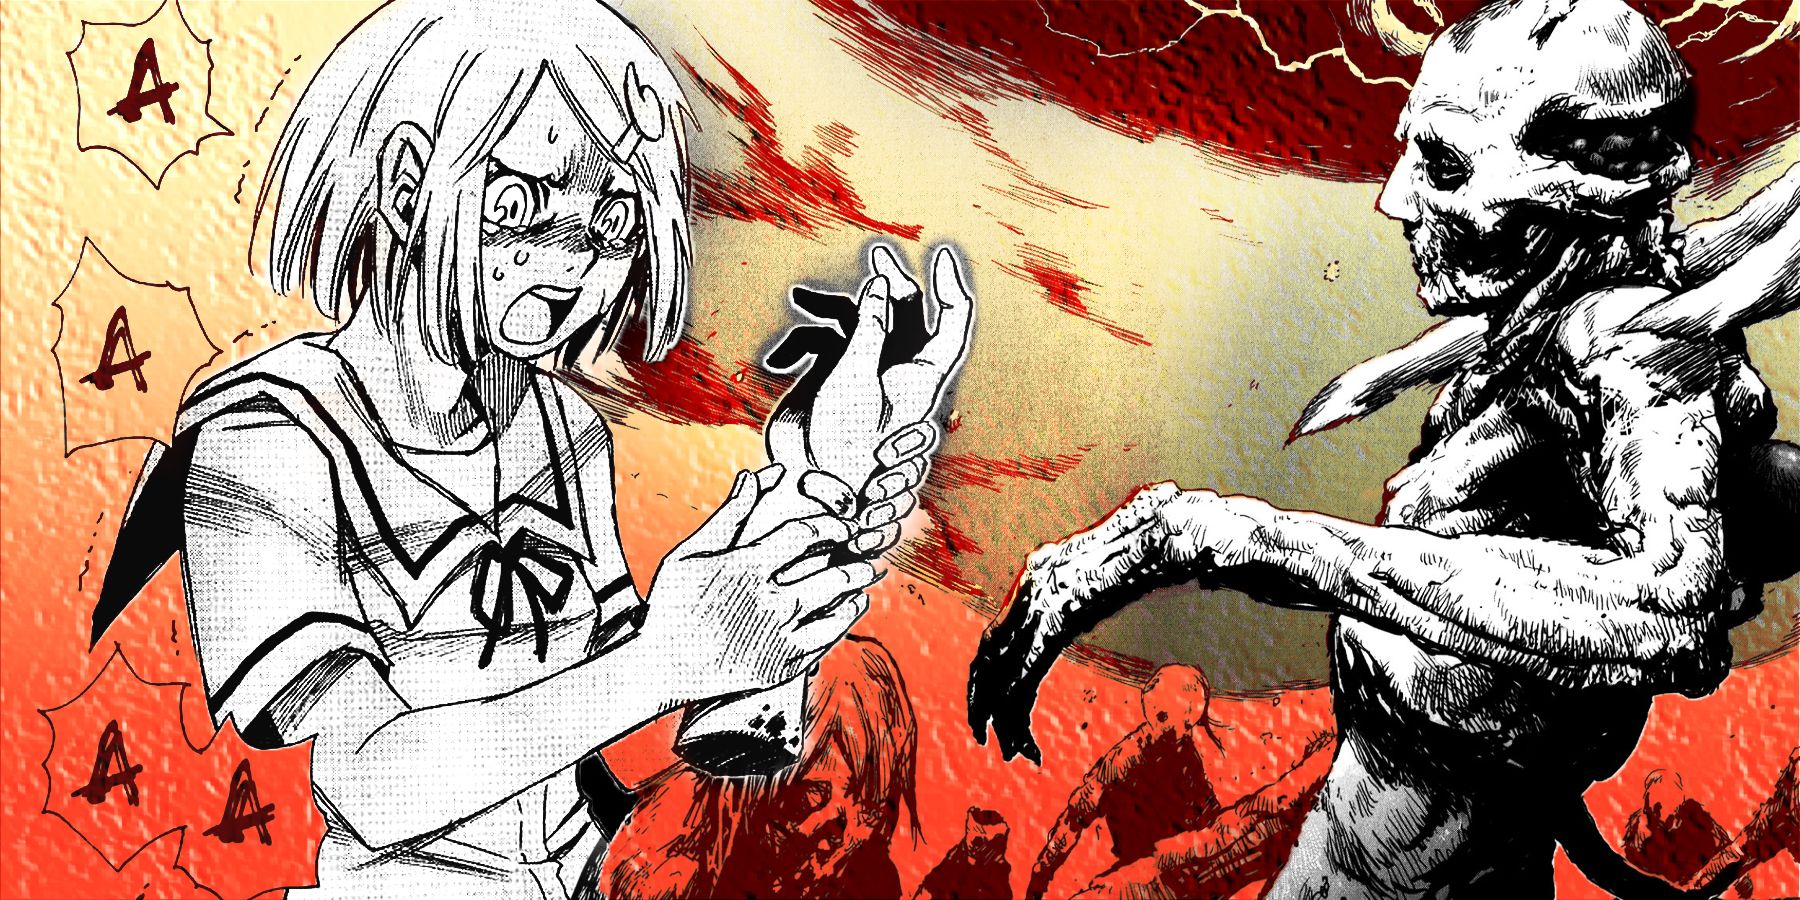 An illustration of a girl screaming at a severed hand from the manga Cradle of Monsters and zombies from manga Biomega